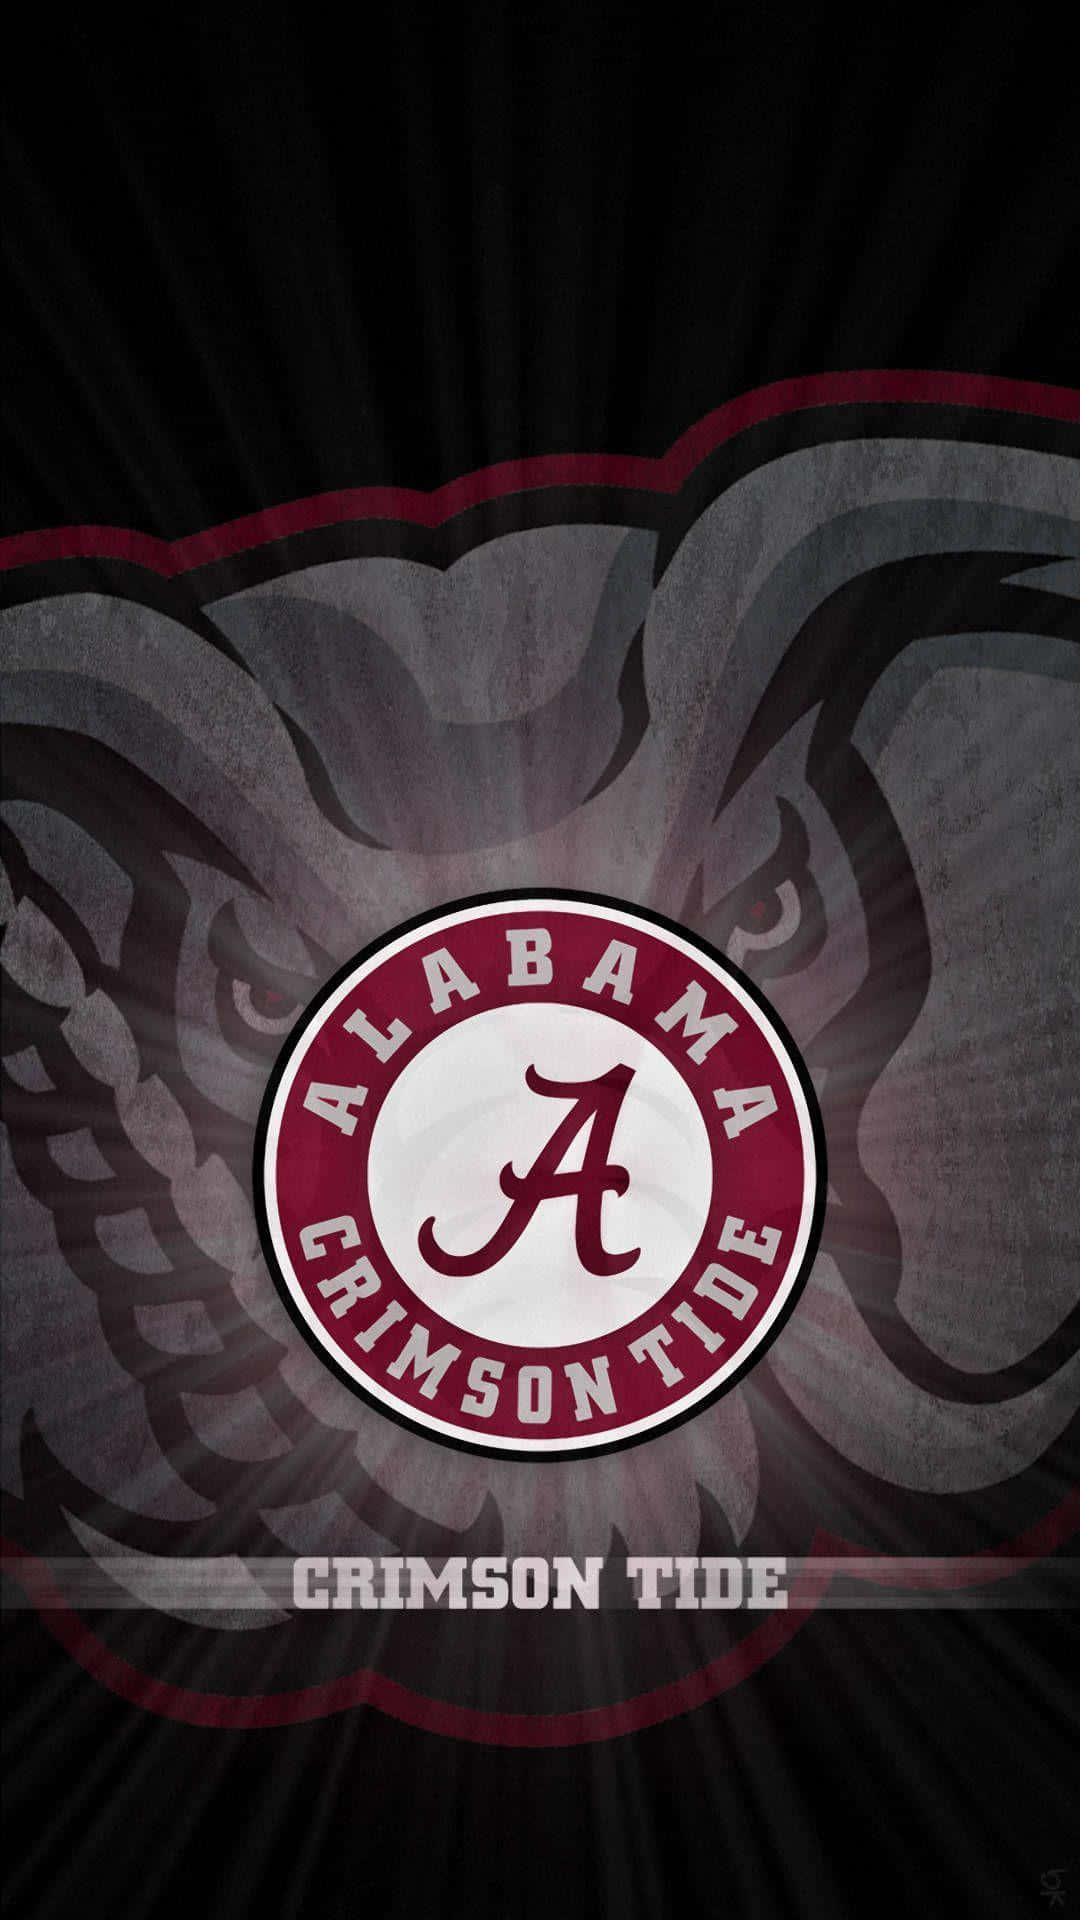 Alabama Crimson Tide is the Pride of the South.